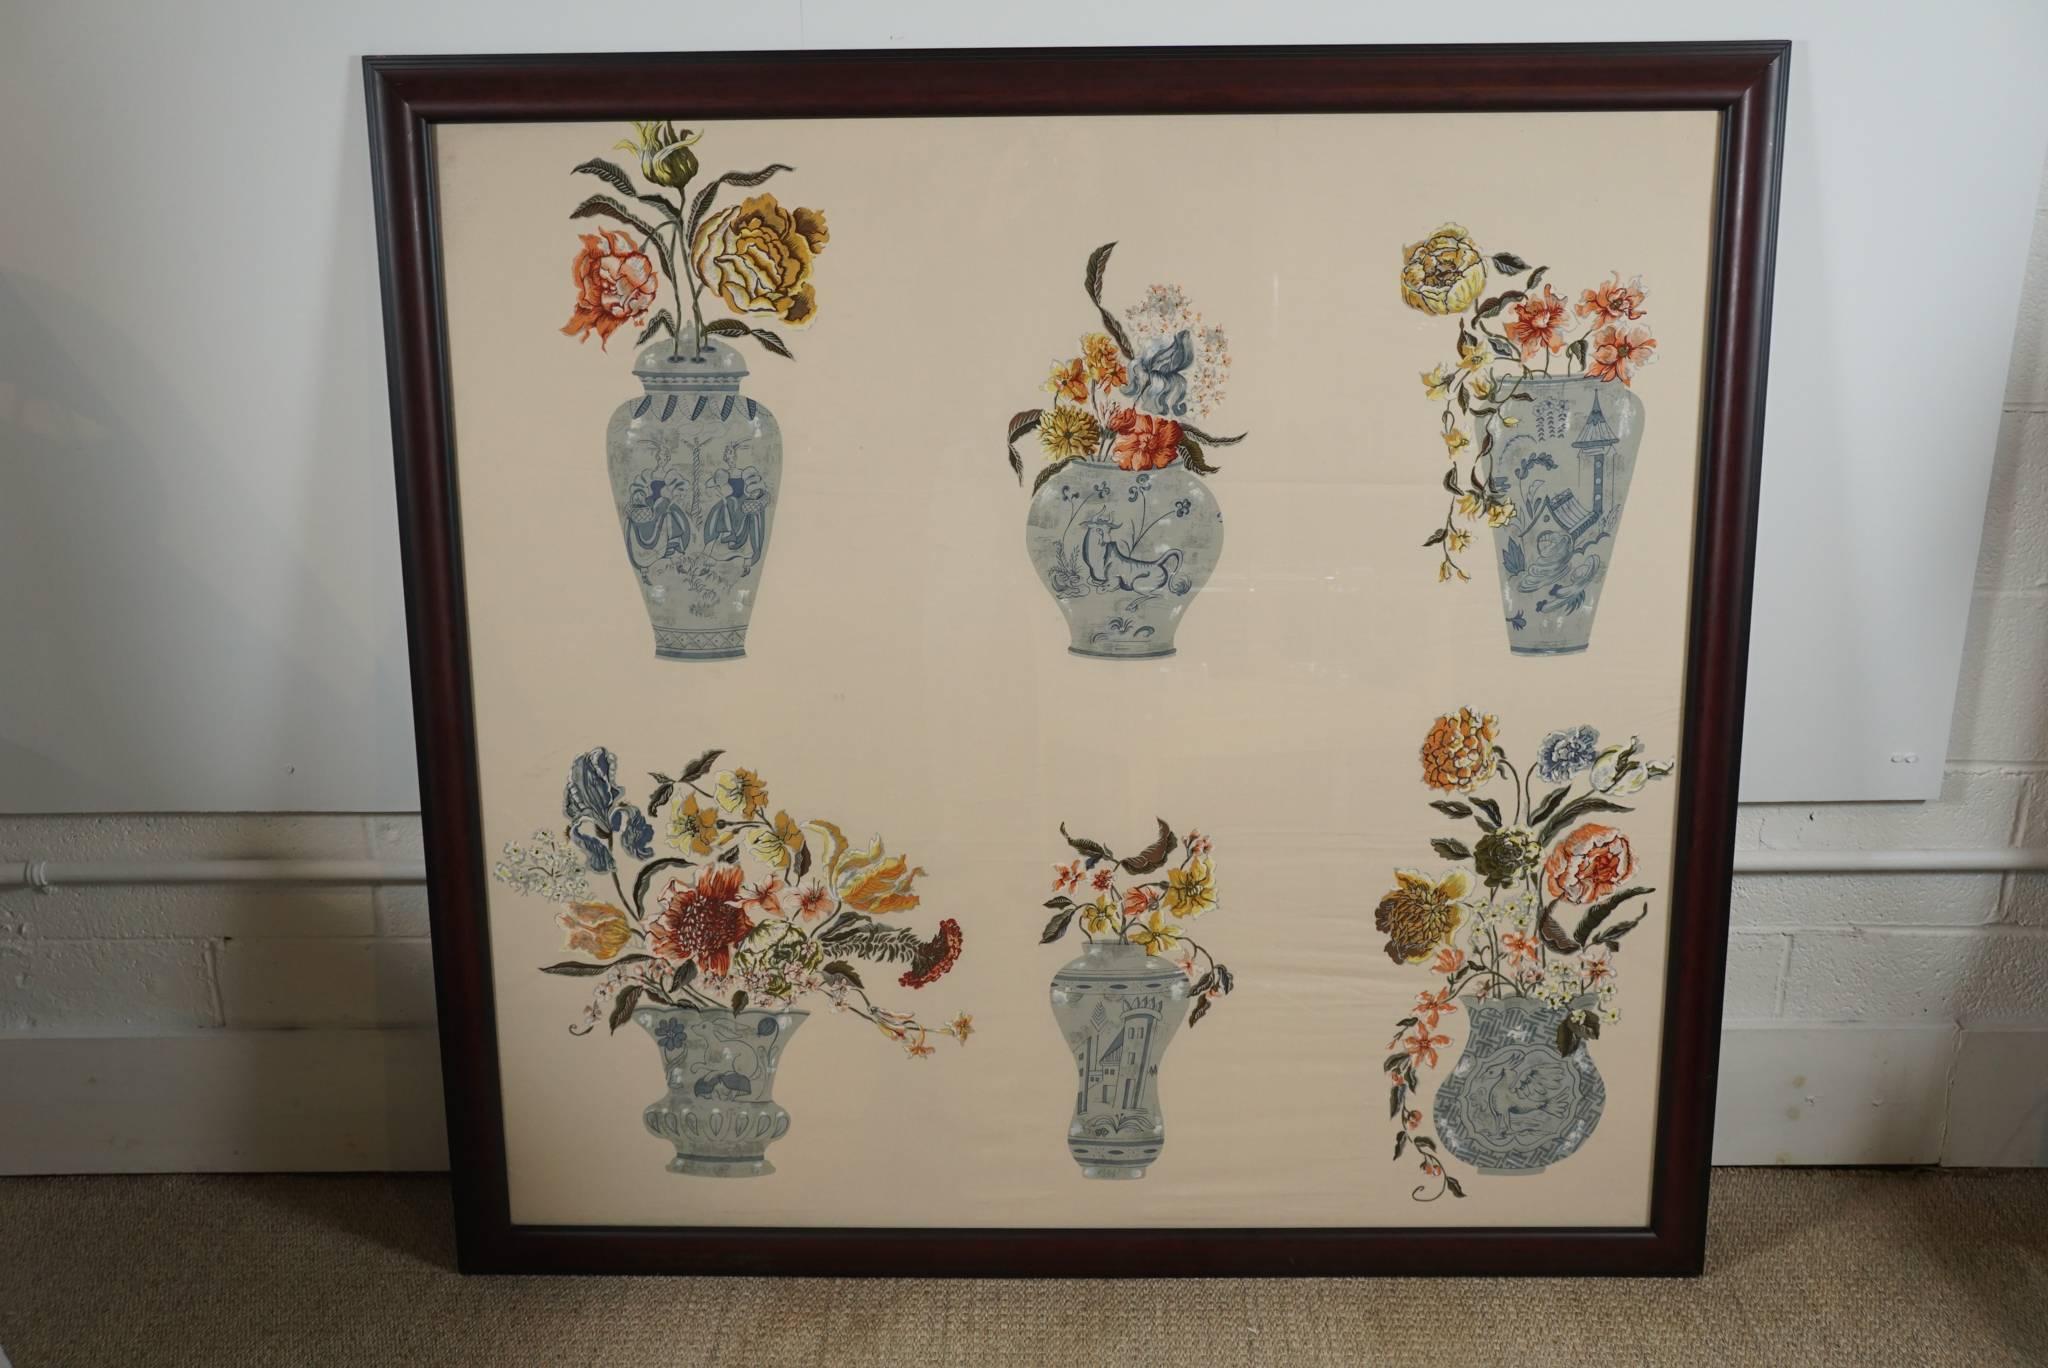 Here is a beautiful fabric panel with printed images of illustrated vases with flowers. The fabric is framed in a walnut stained frame and encased in plexiglass.